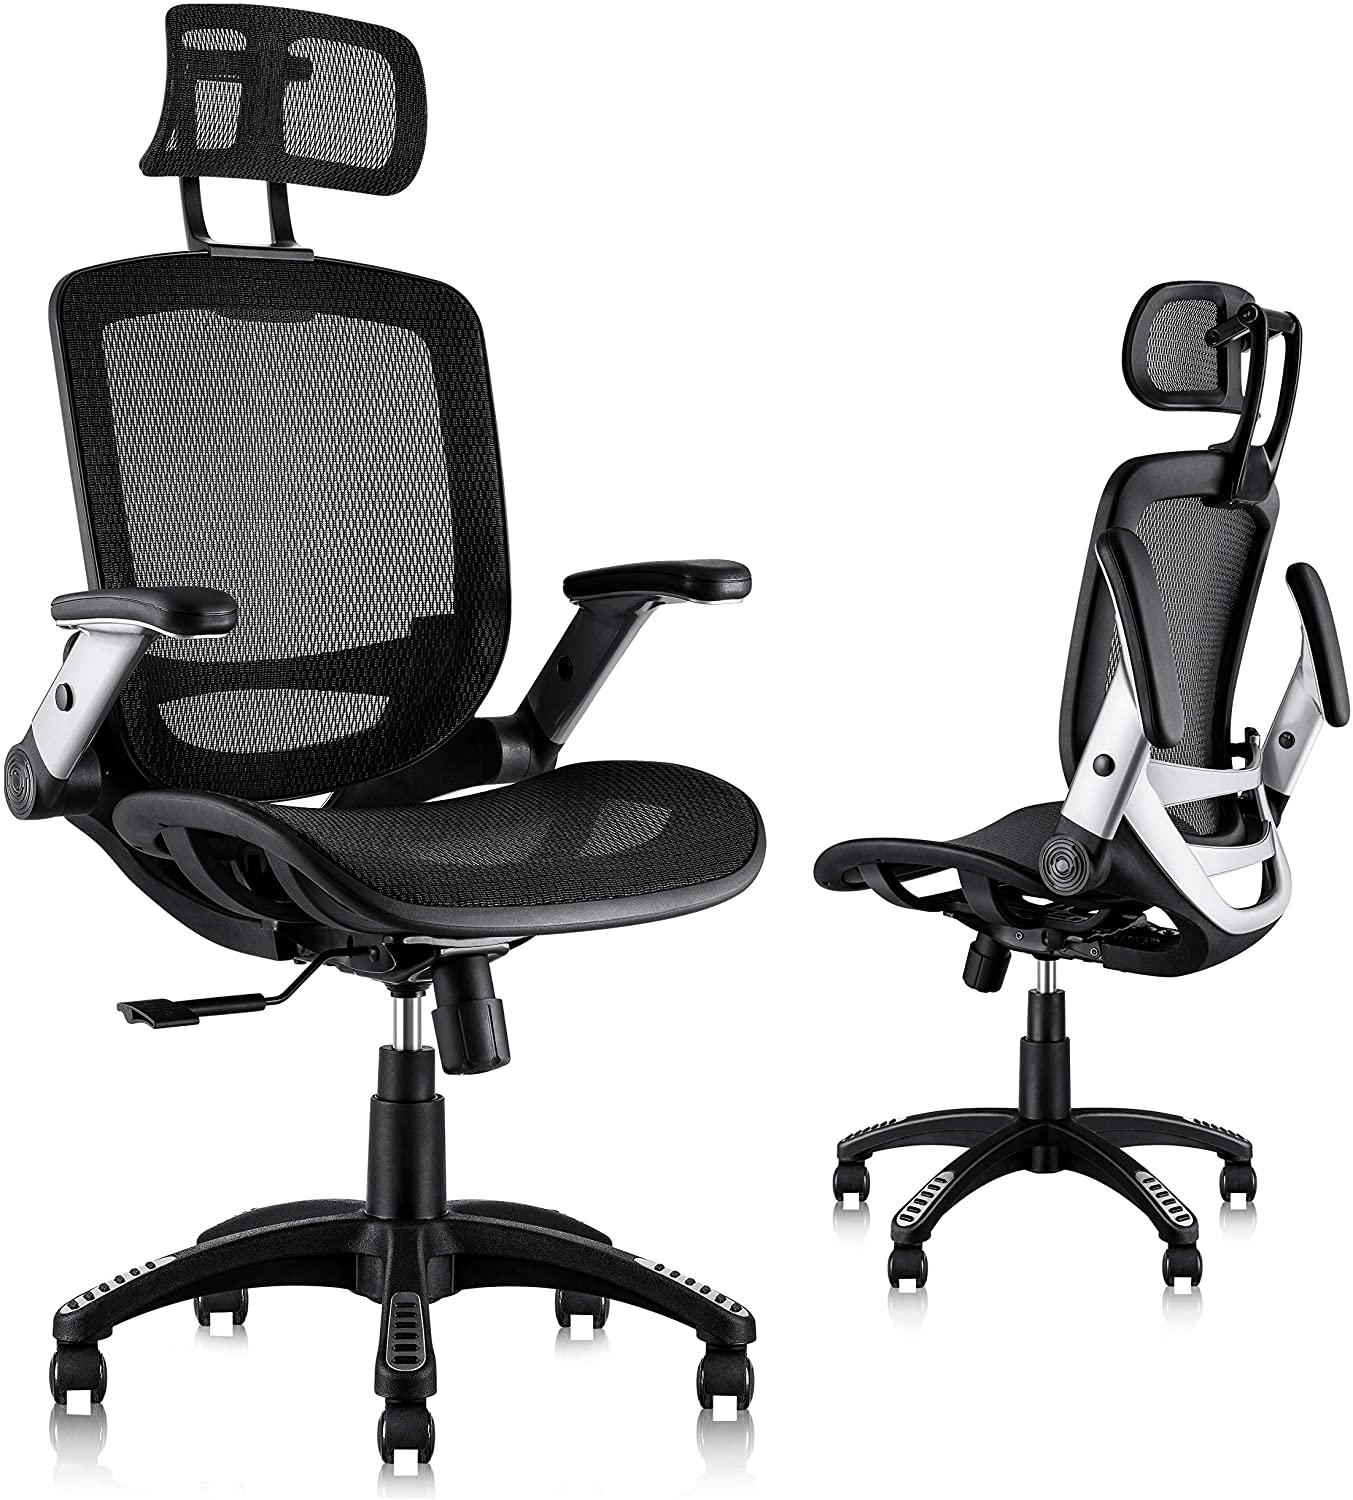 Photo 1 of Gabrylly Ergonomic Mesh Office Chair High Back Desk Chair  Adjustable Headrest with FlipUp Arms Tilt Function Lumbar Support and PU Wheels Swivel Computer Task Chair Loose Hardware All major parts accounted for wheels seat back head legs